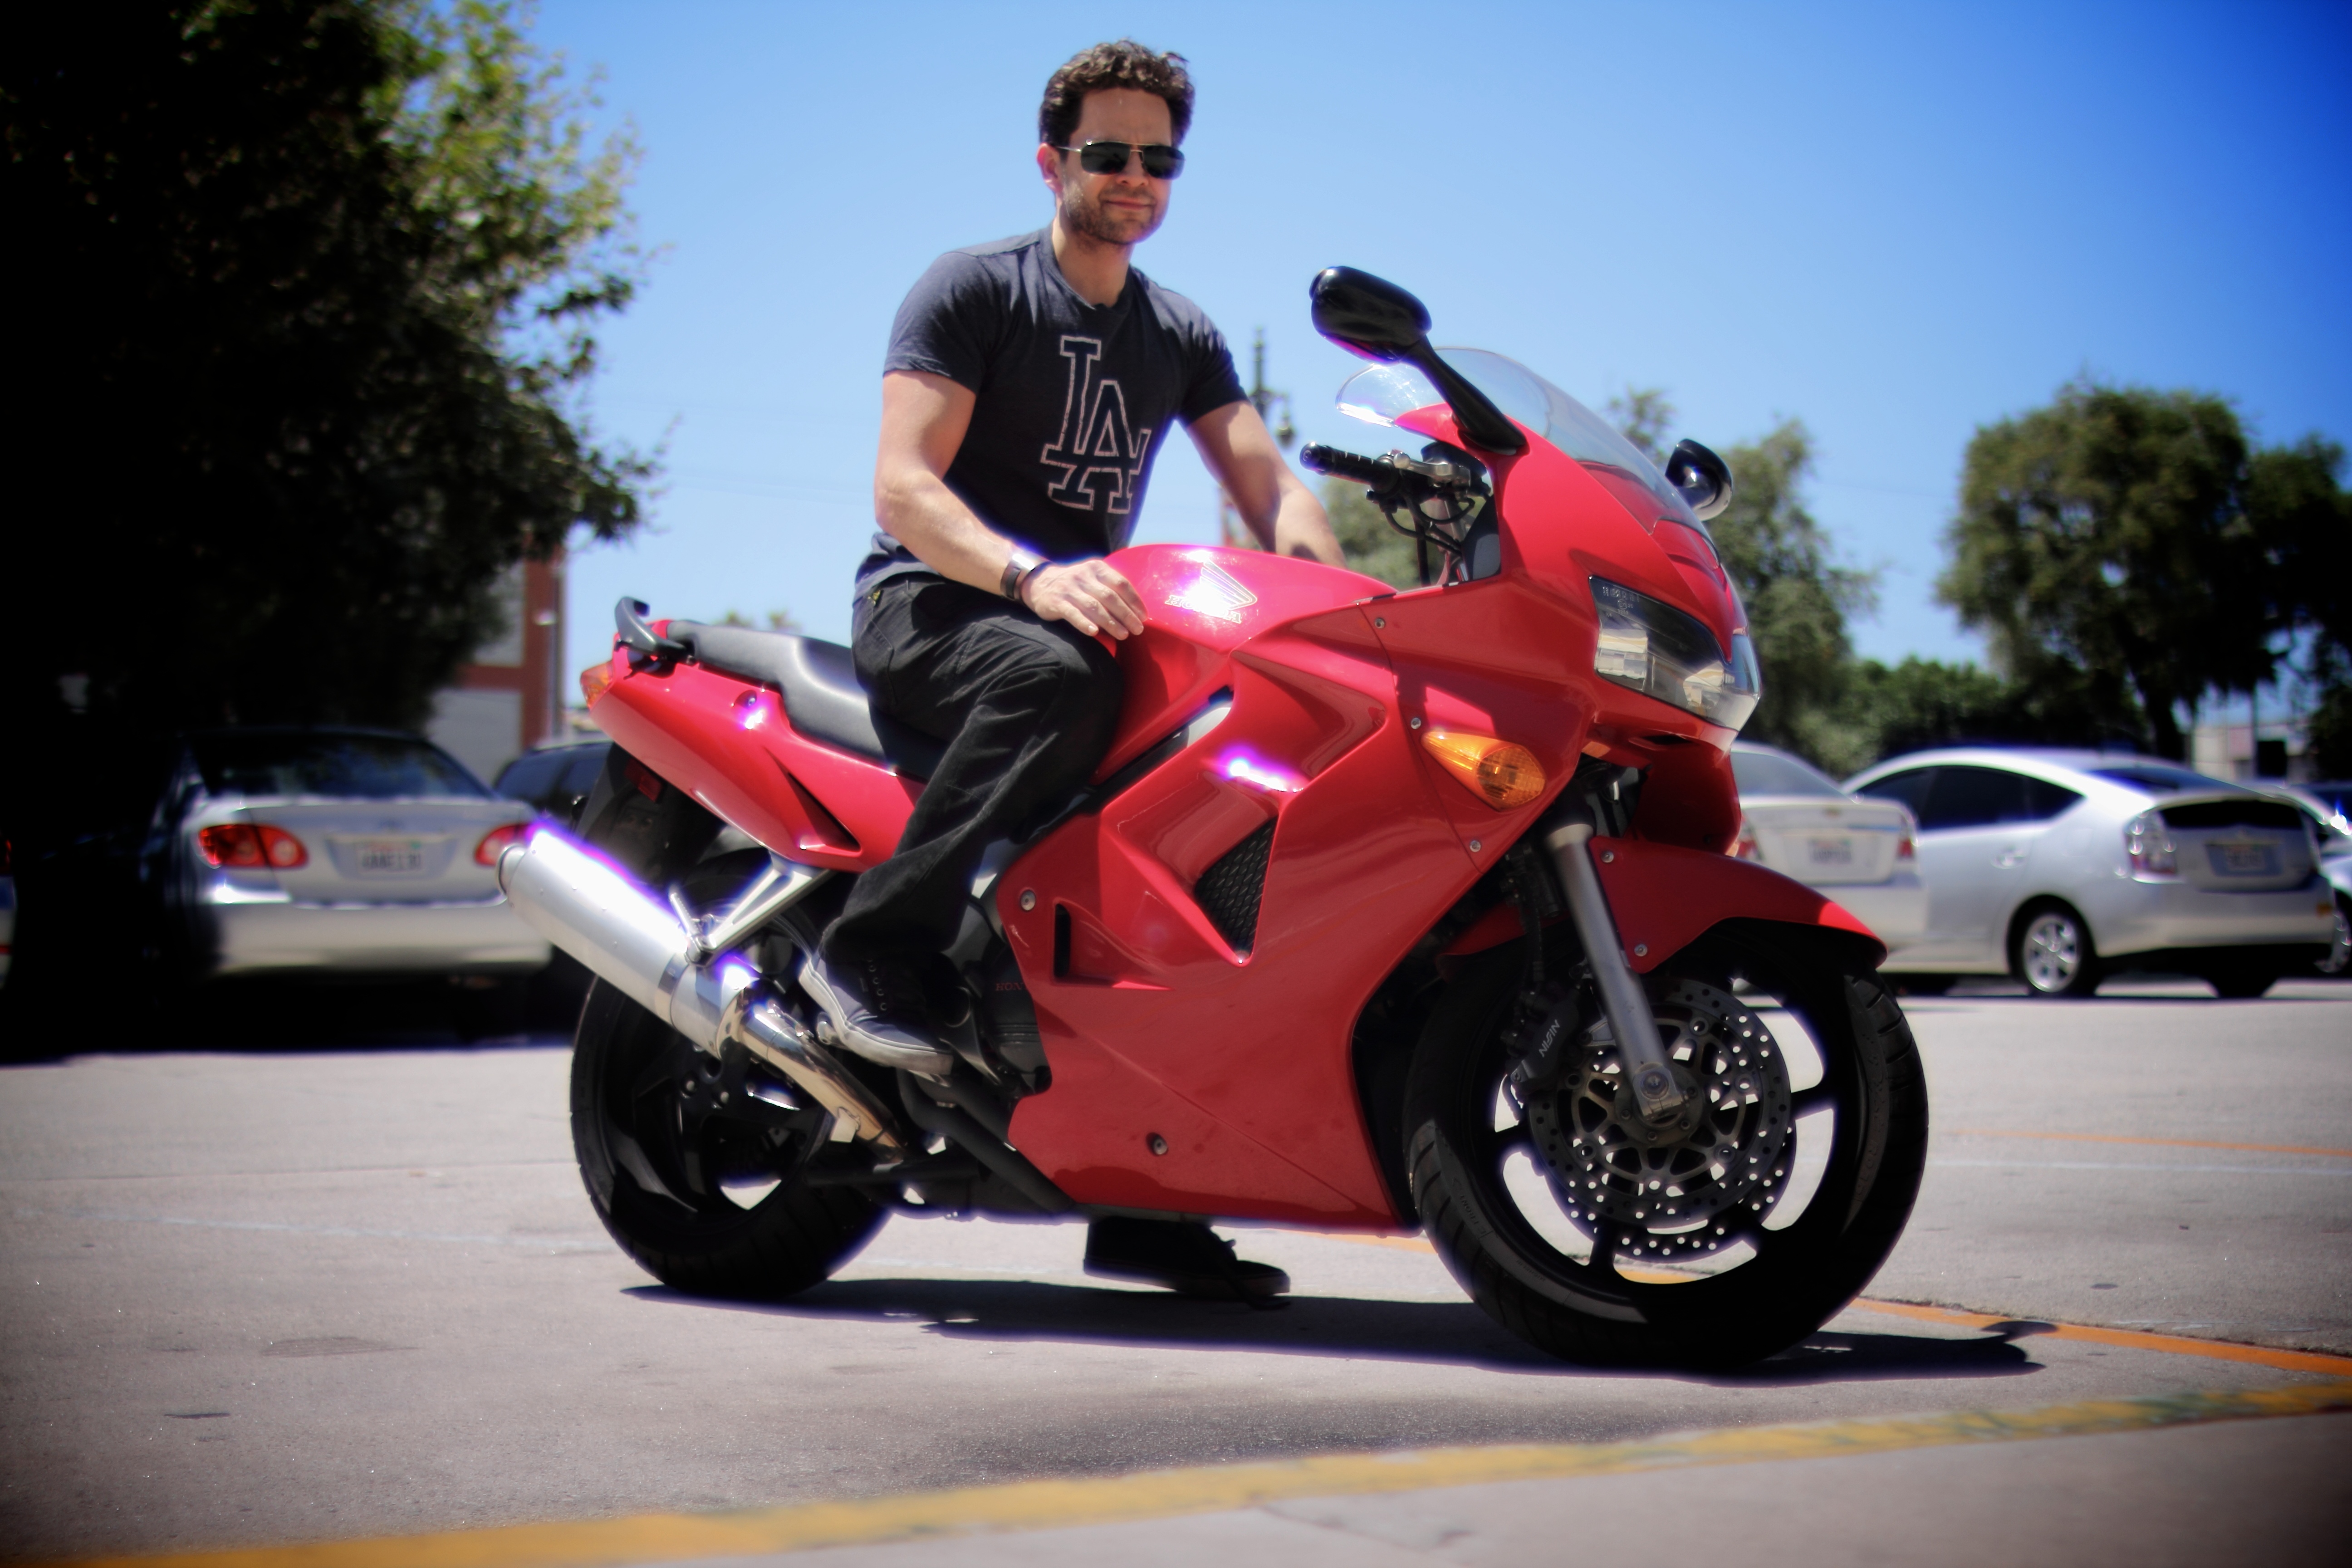 Ryan J-W Smith has been riding motorcycles since he was 16. His Honda VFR800i is one of his favorites.